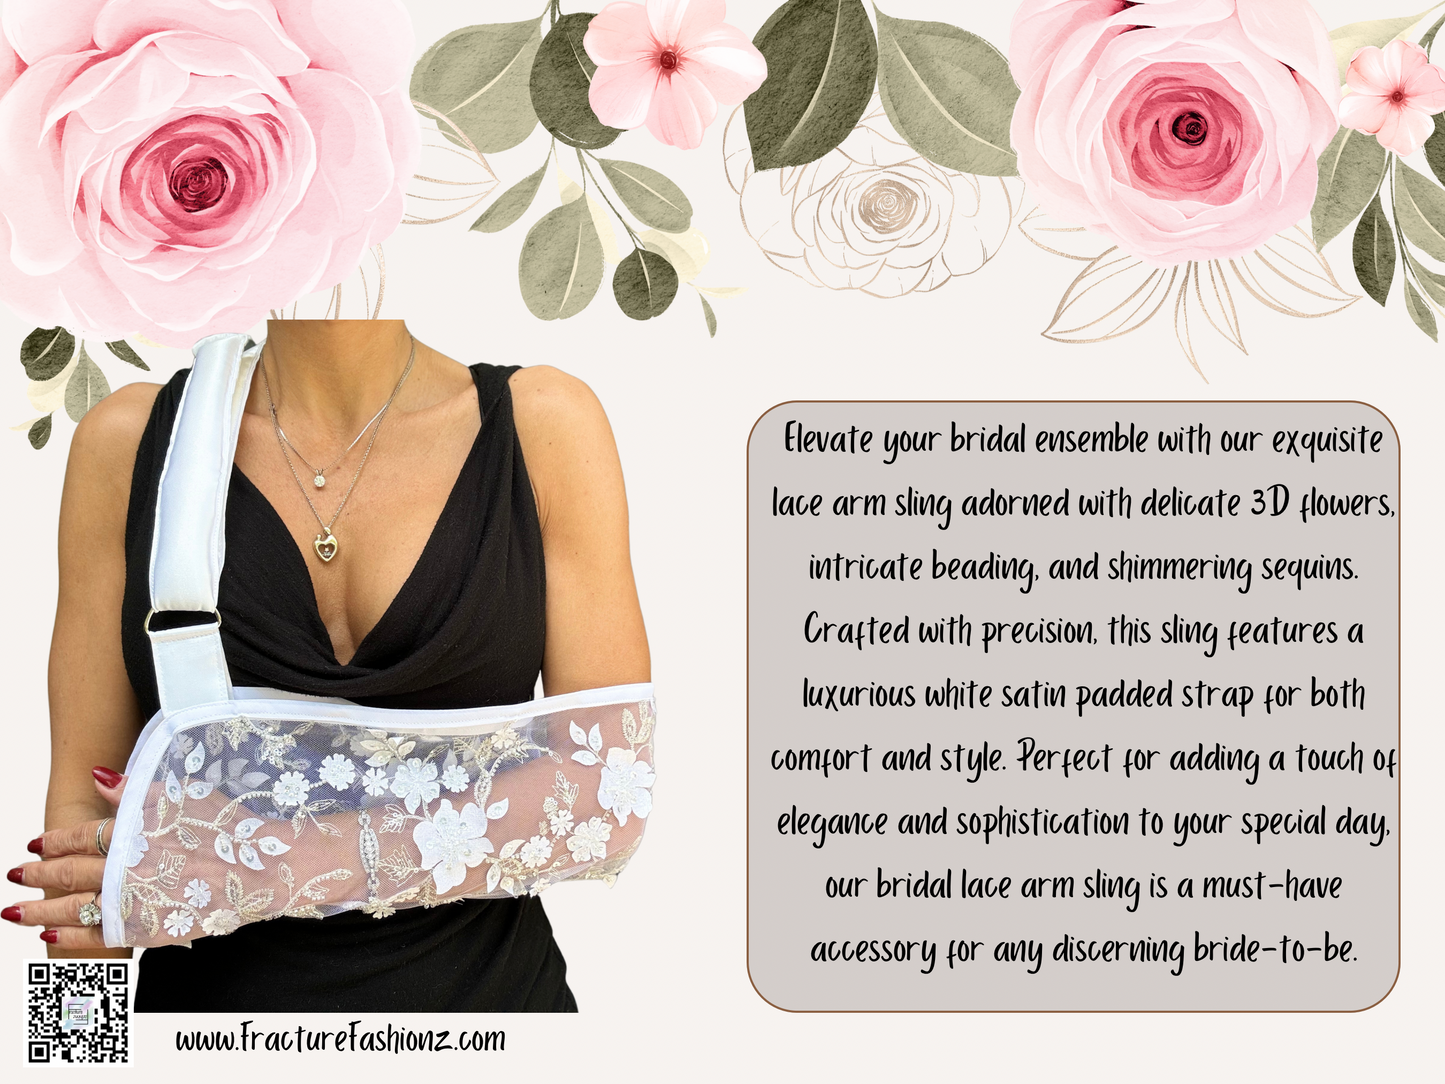 Enchanting Bridal Lace Arm Sling: 3D Flowers, Beads, and Sequins